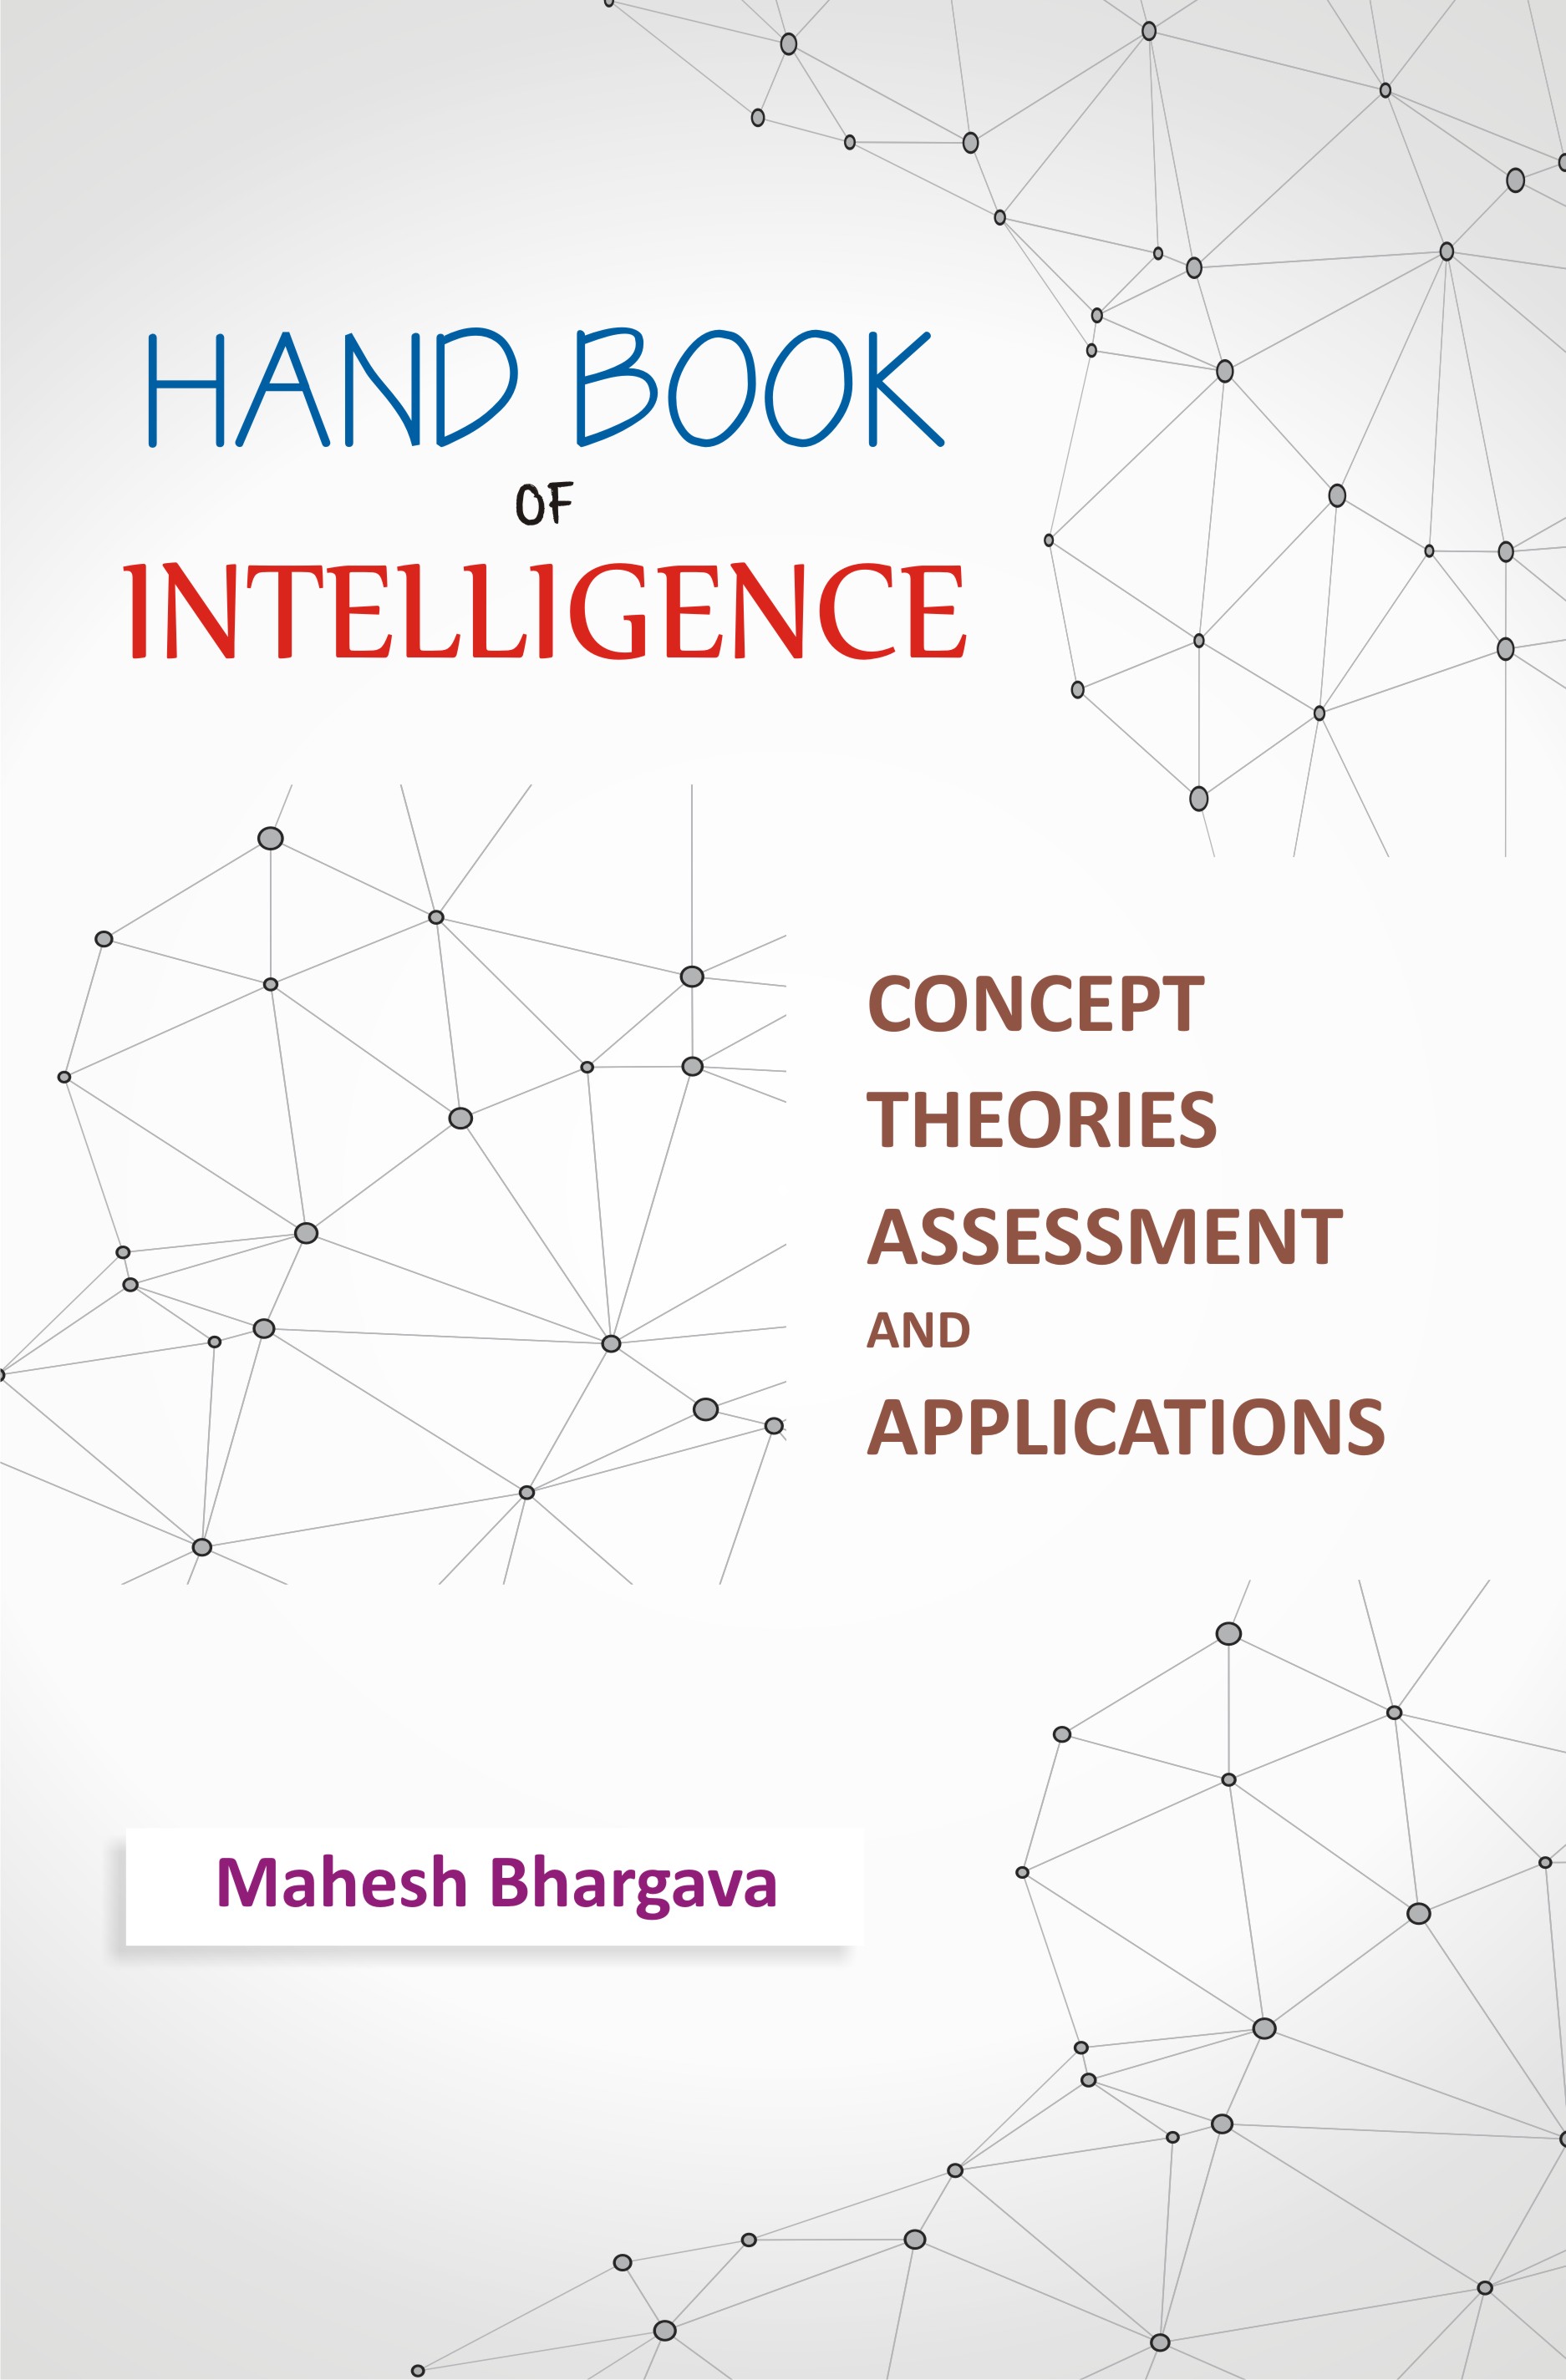 HAND-BOOK-OF-INTELLIGENCE-(Concept-Theories-Assessment-and-Applications)